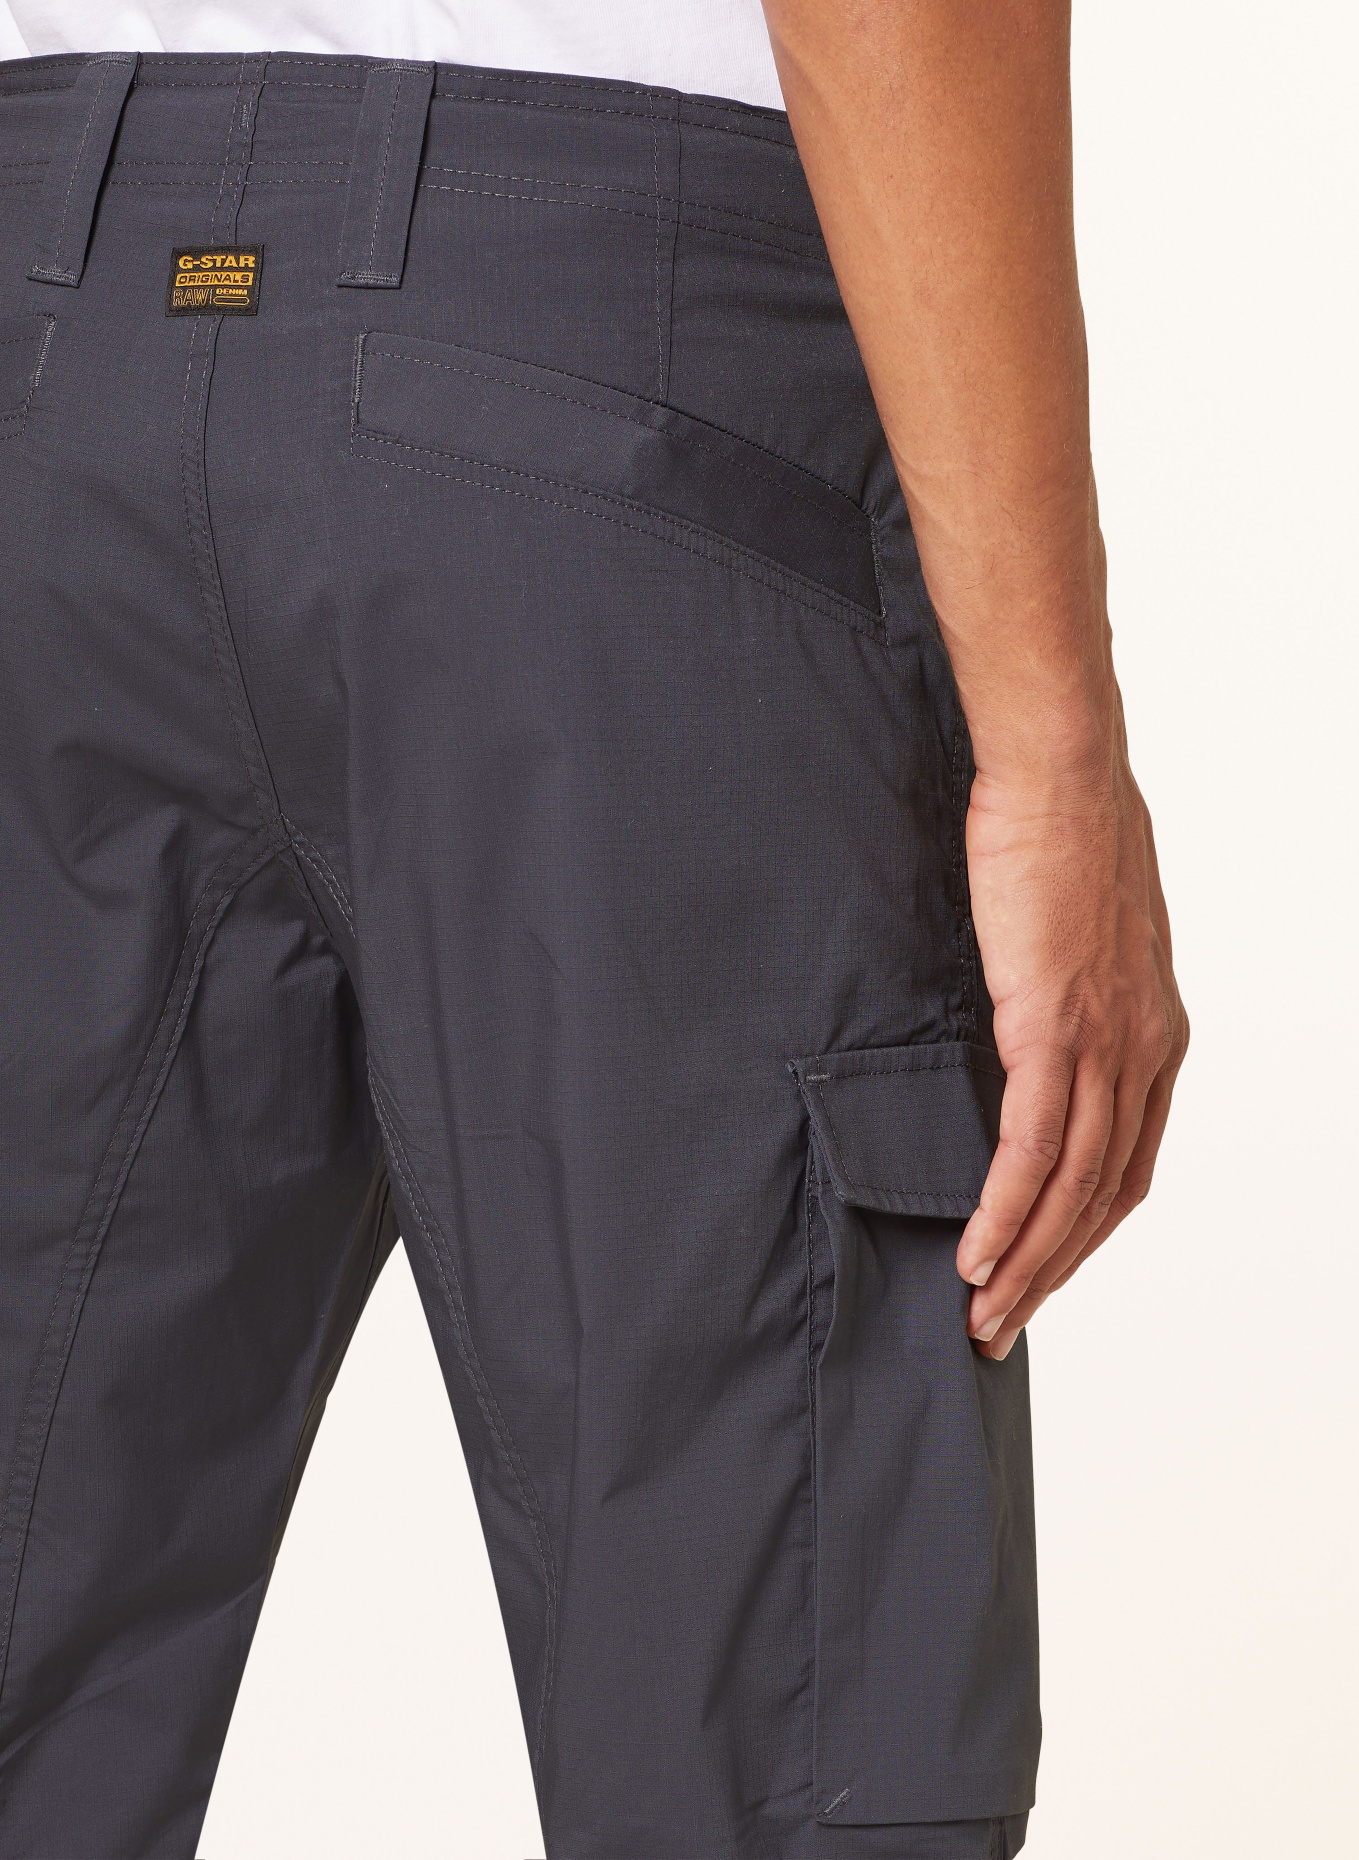 G-Star RAW Cargo pants CORE regular tapered fit, Color: DARK BLUE (Image 6)